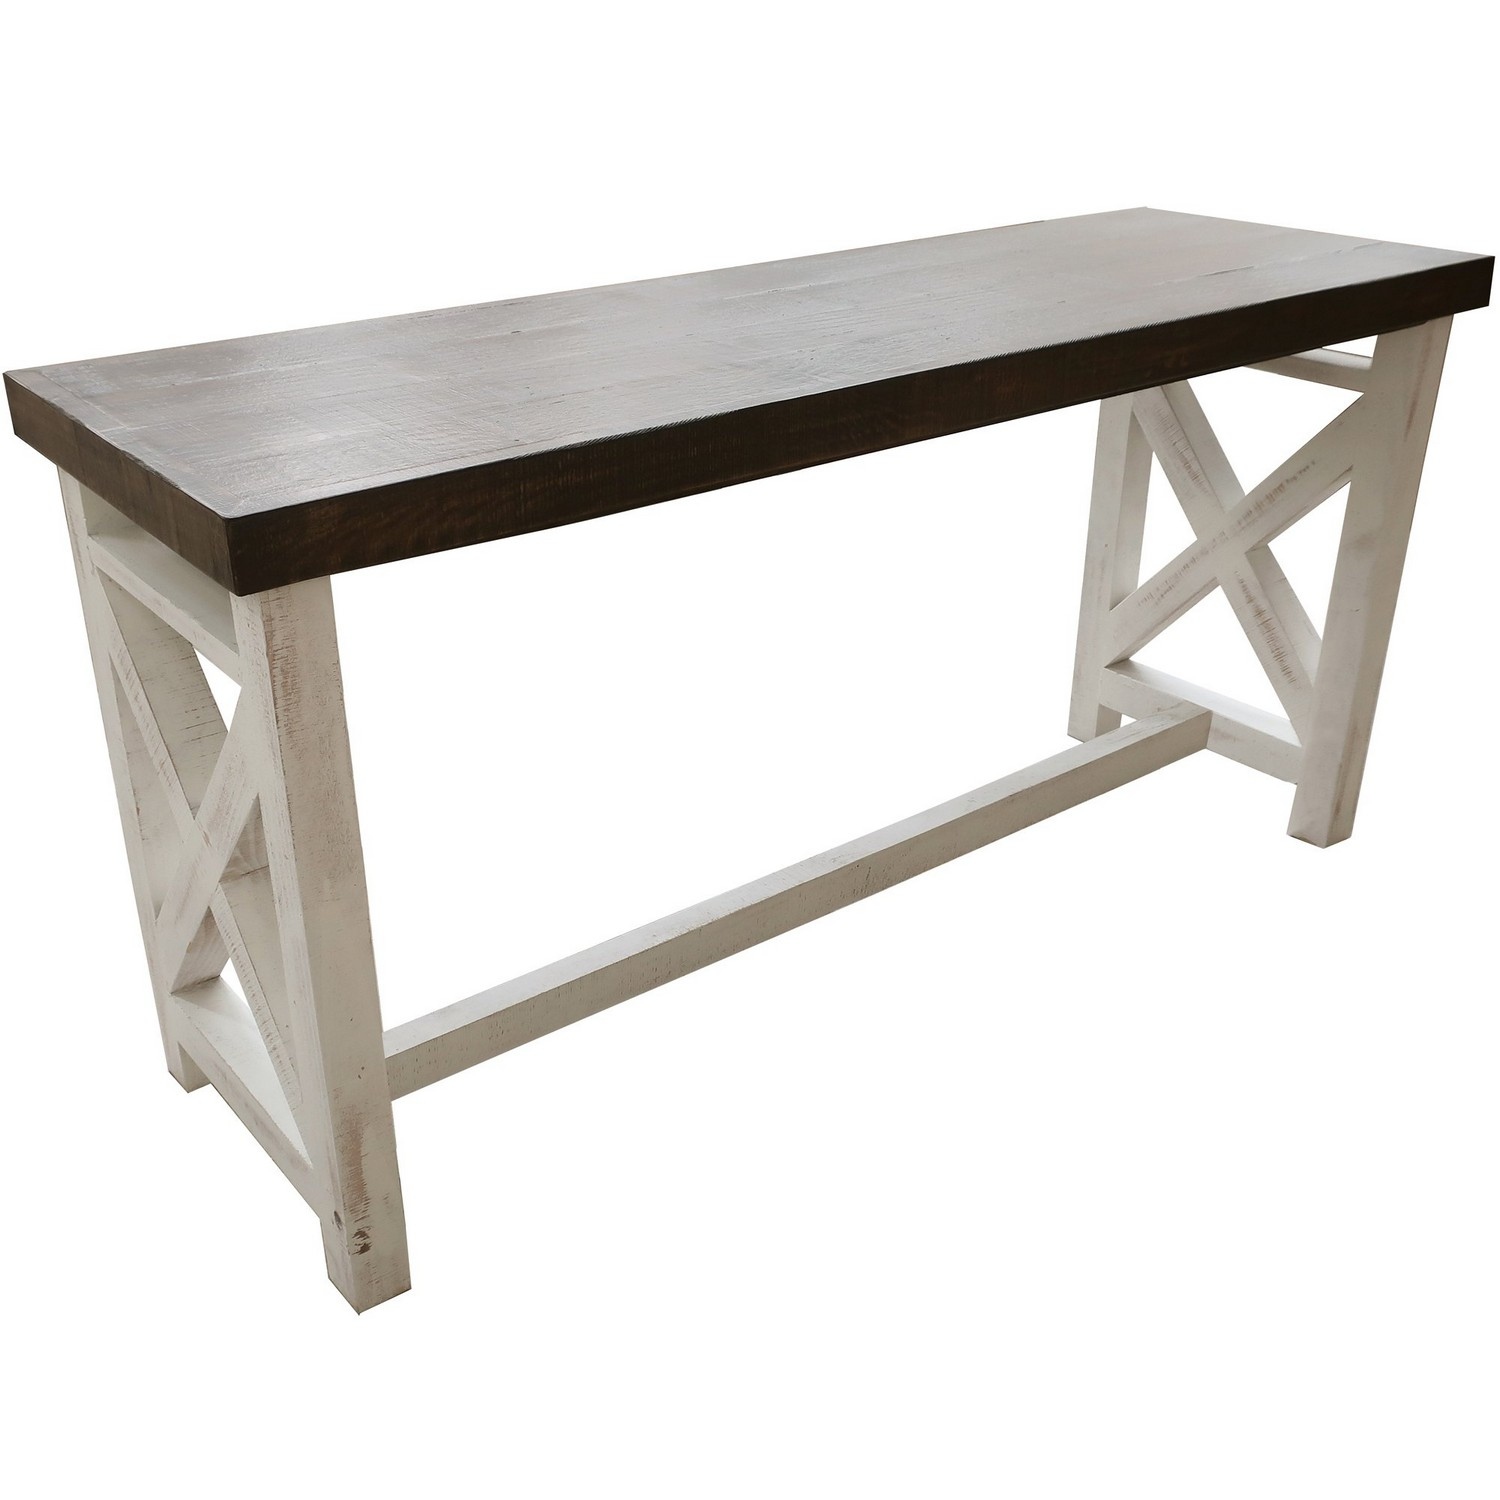 Parker House Mesa Everywhere Console Table - Antique White